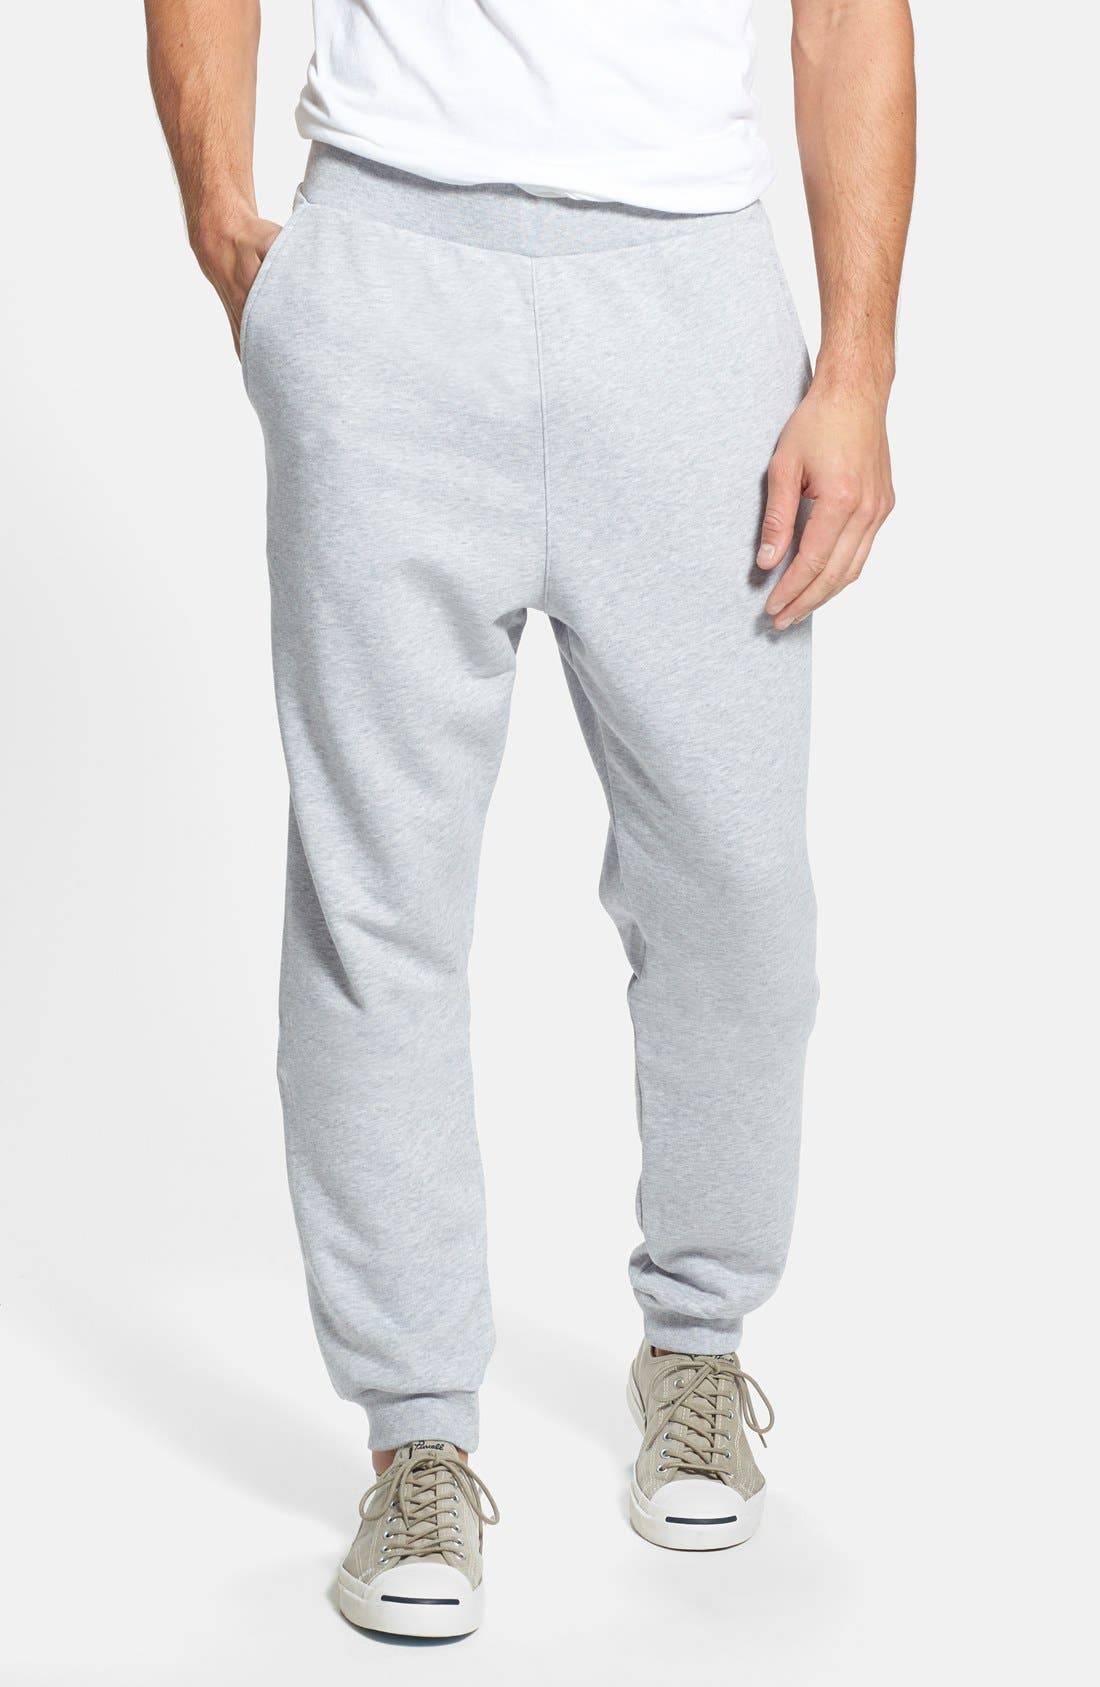 lacoste big and tall sweatpants